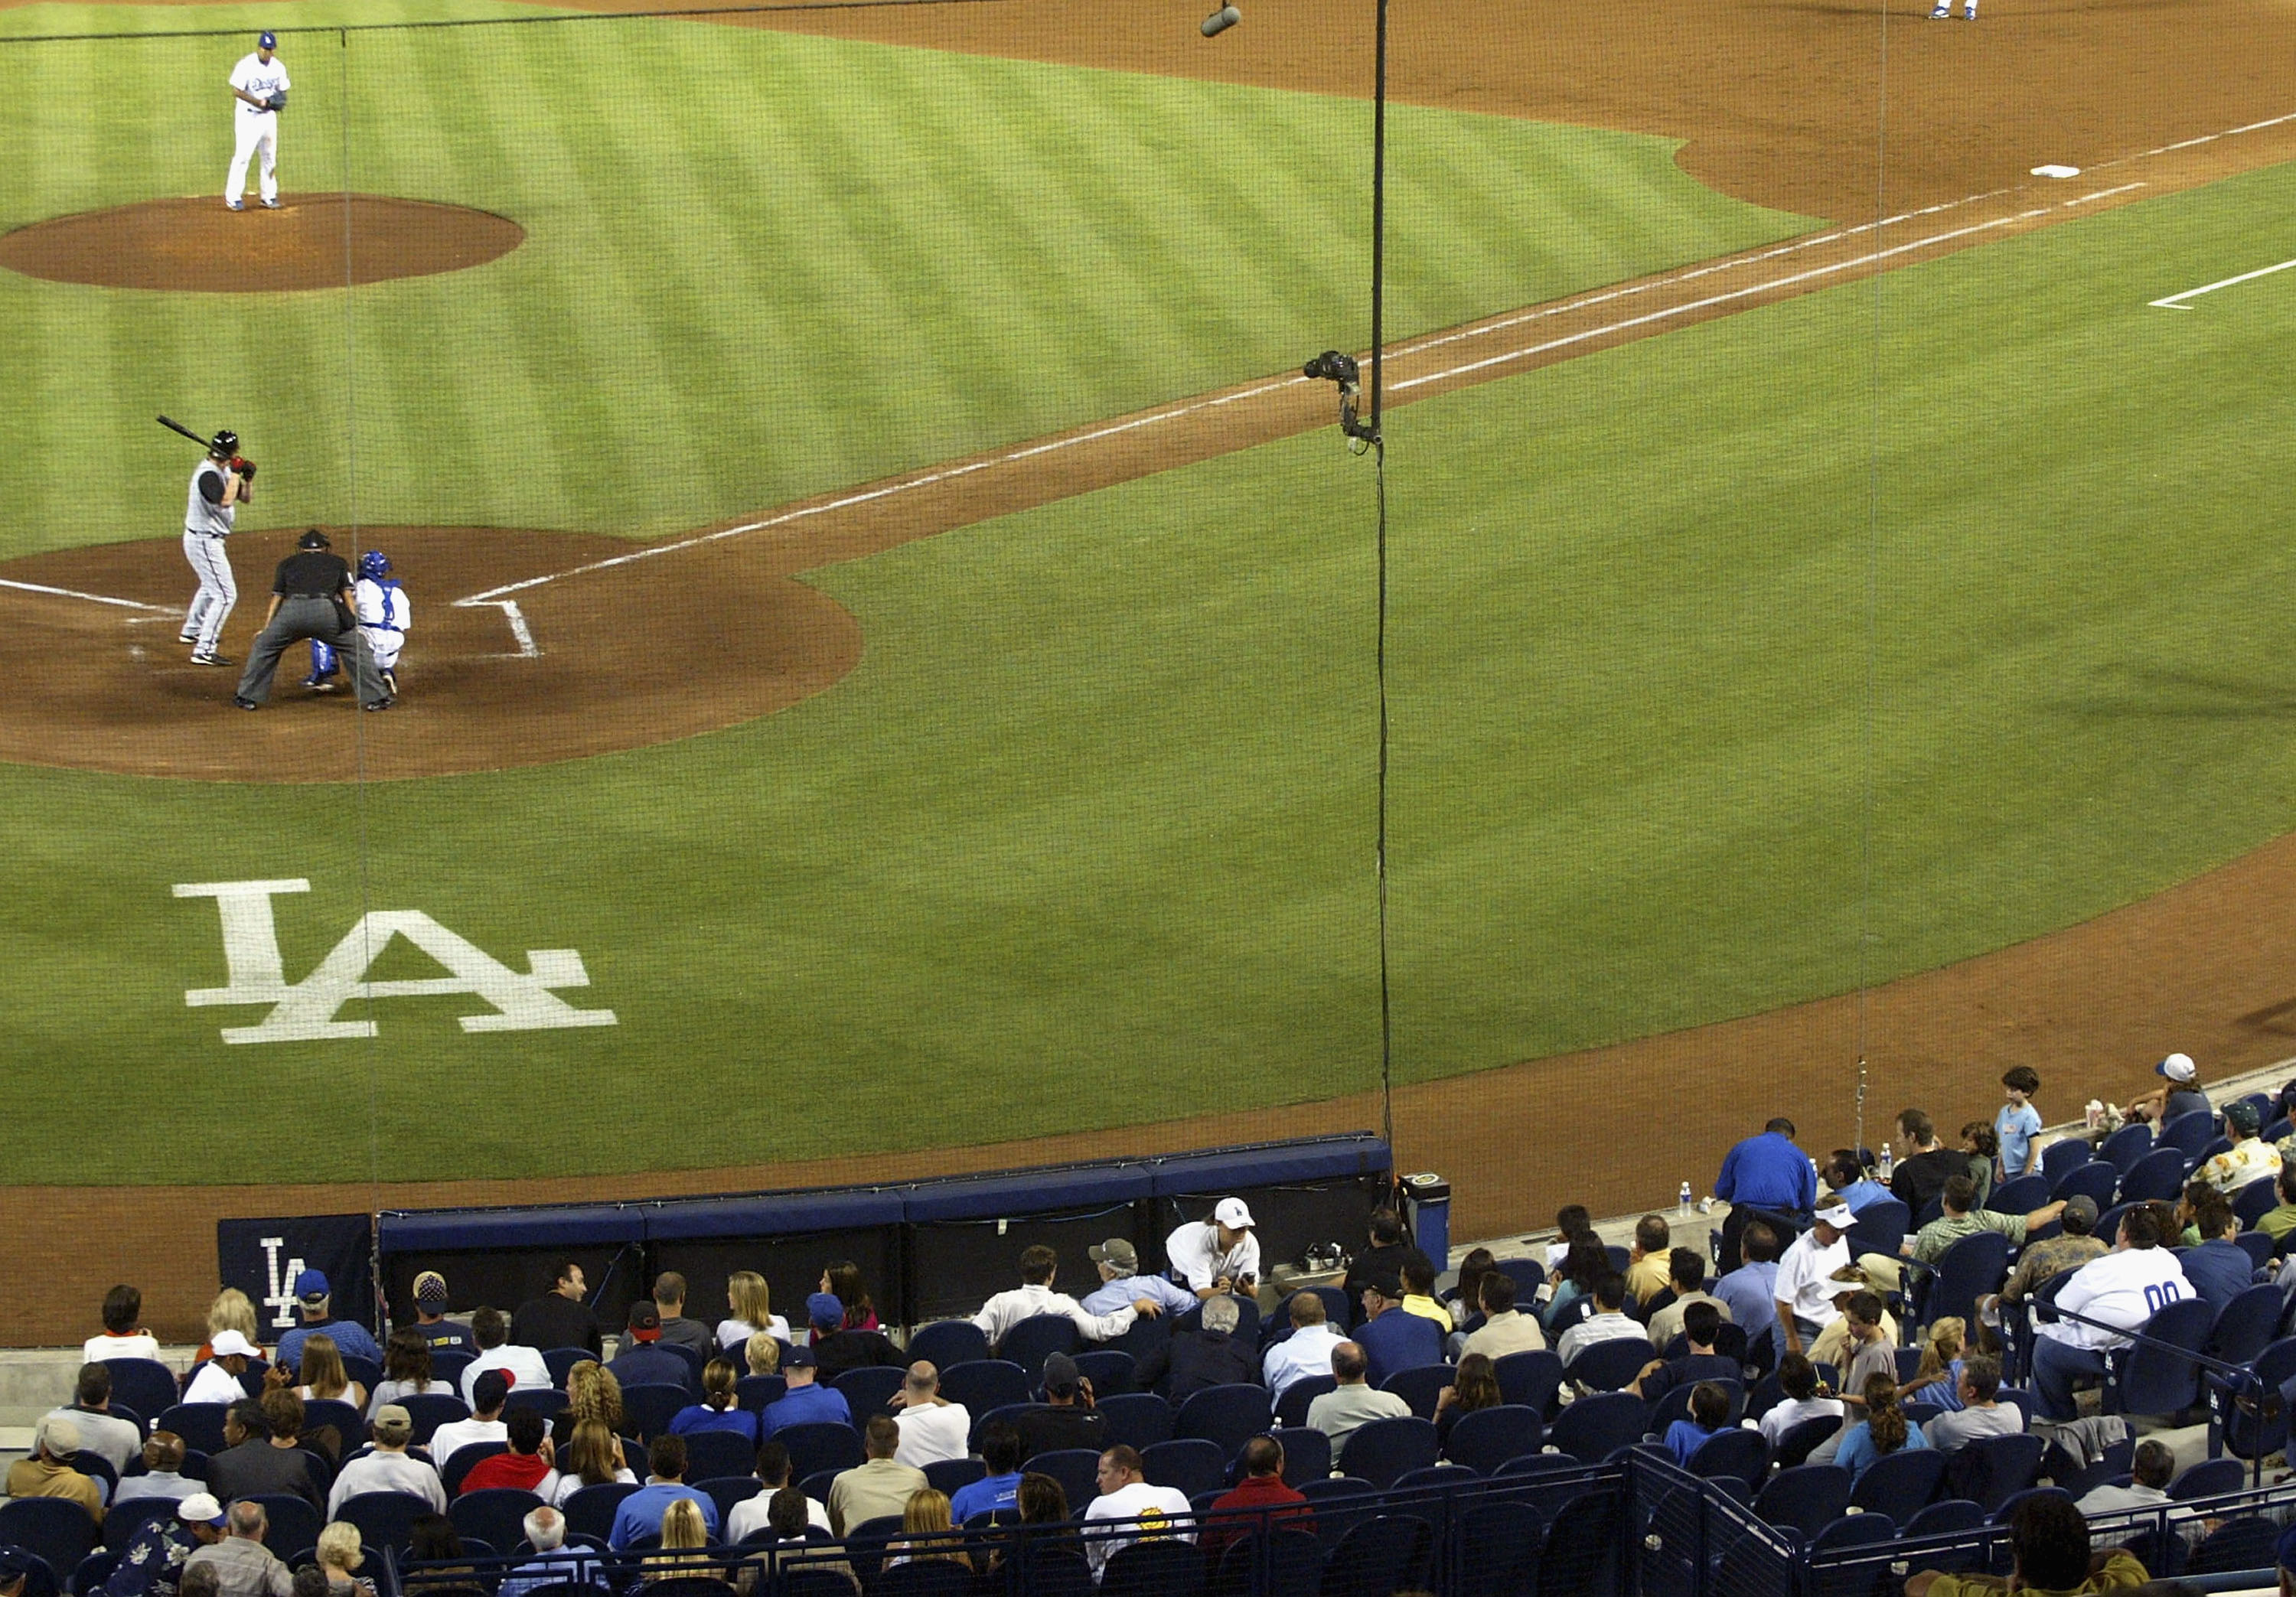 The Dodgers are reportedly set to host the 2020 All-Star Game